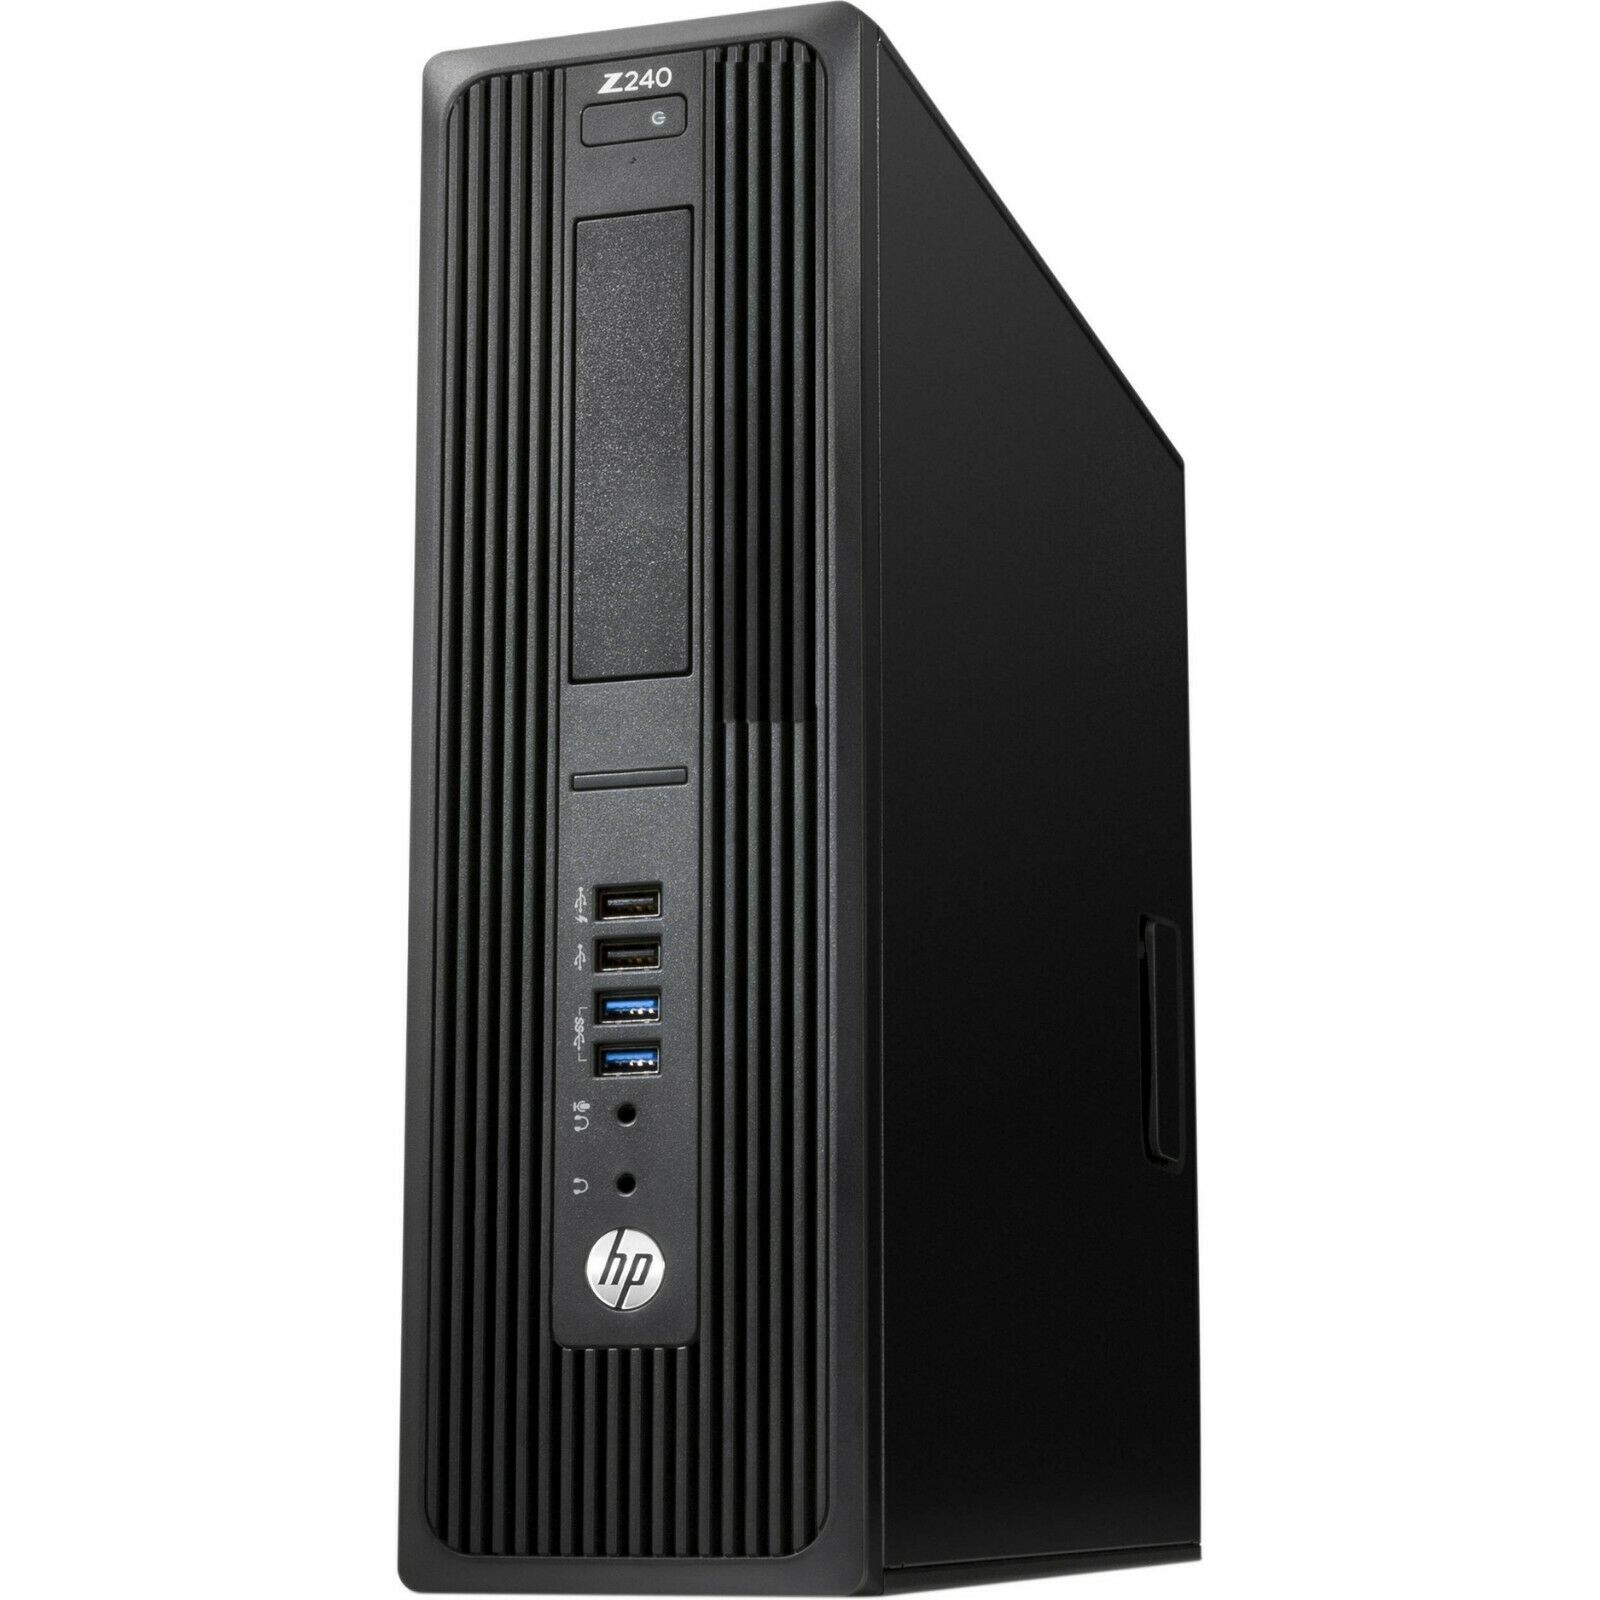 Restored HP Z240 Workstation SFF Computer Core i5 6th 3.4GHz, 8GB Ram, 500GB HDD, New 19" LCD, Keyboard and Mouse, Wi-Fi, Win10 Pro Desktop PC (Refurbished) - image 3 of 9